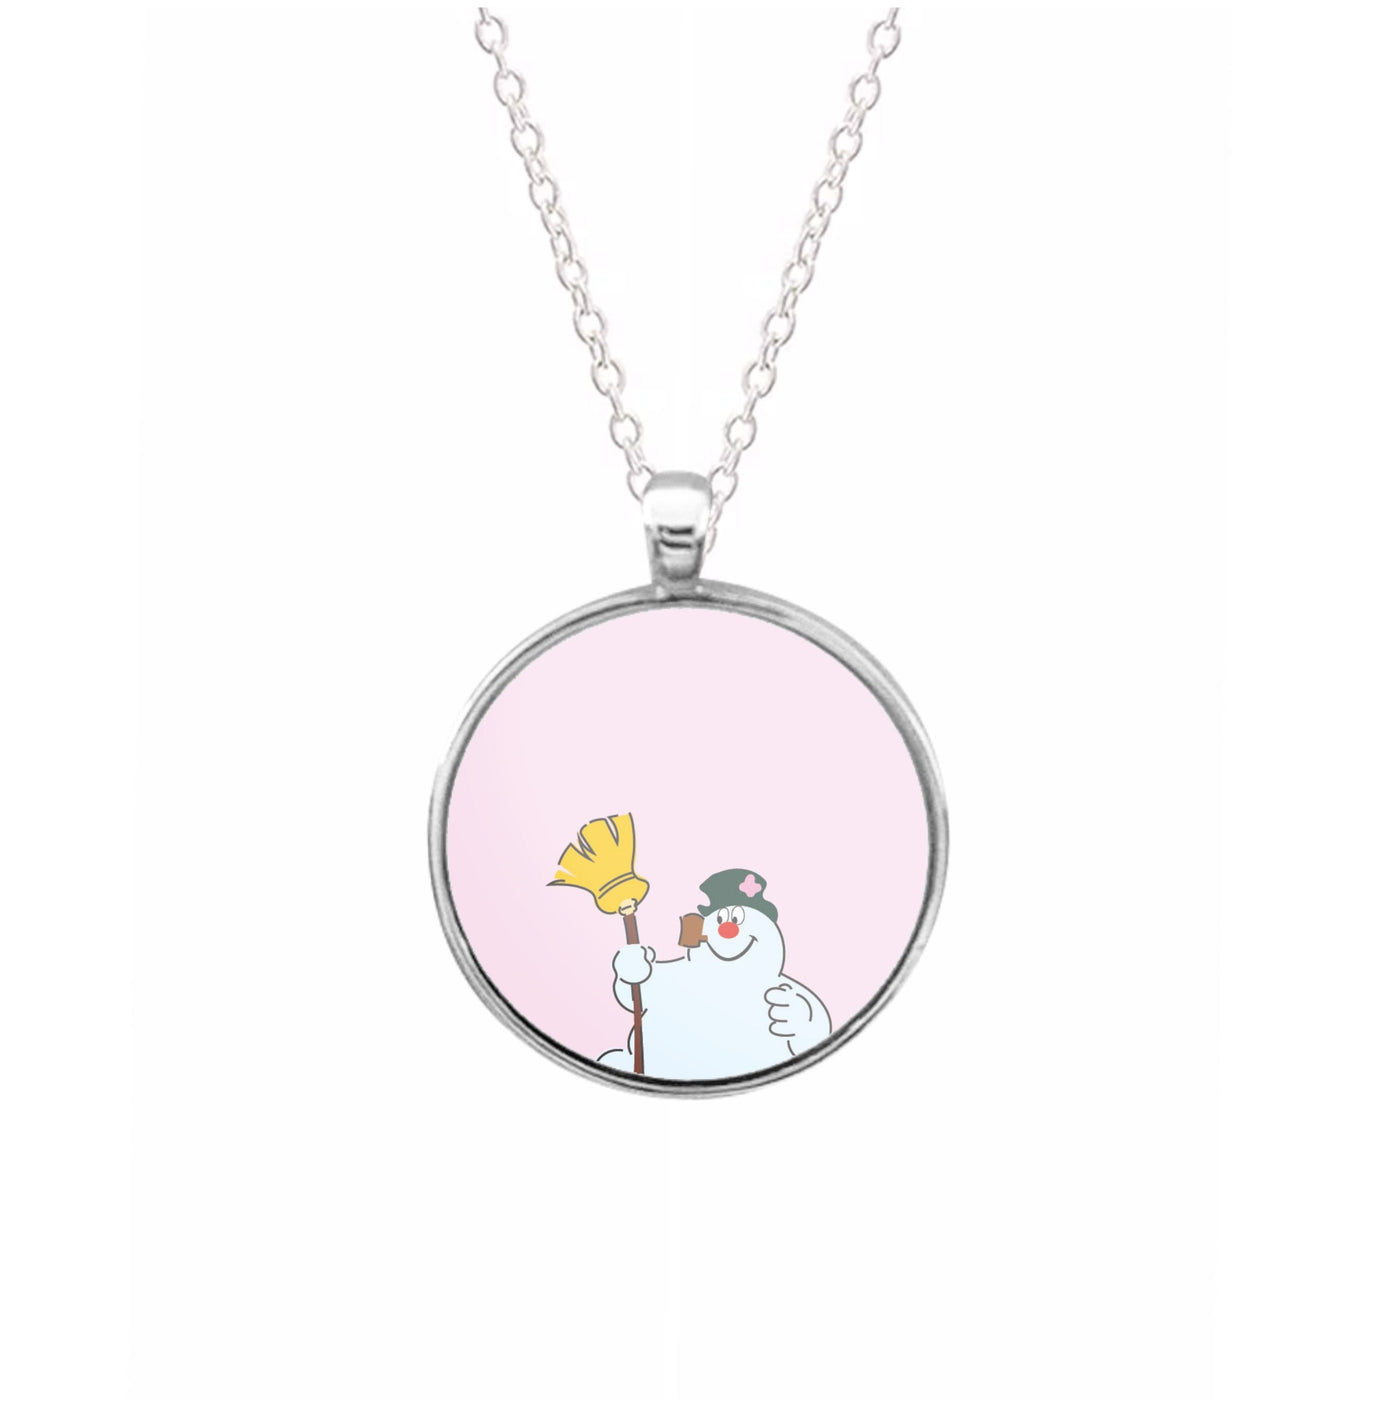 Broom - Frosty The Snowman Necklace